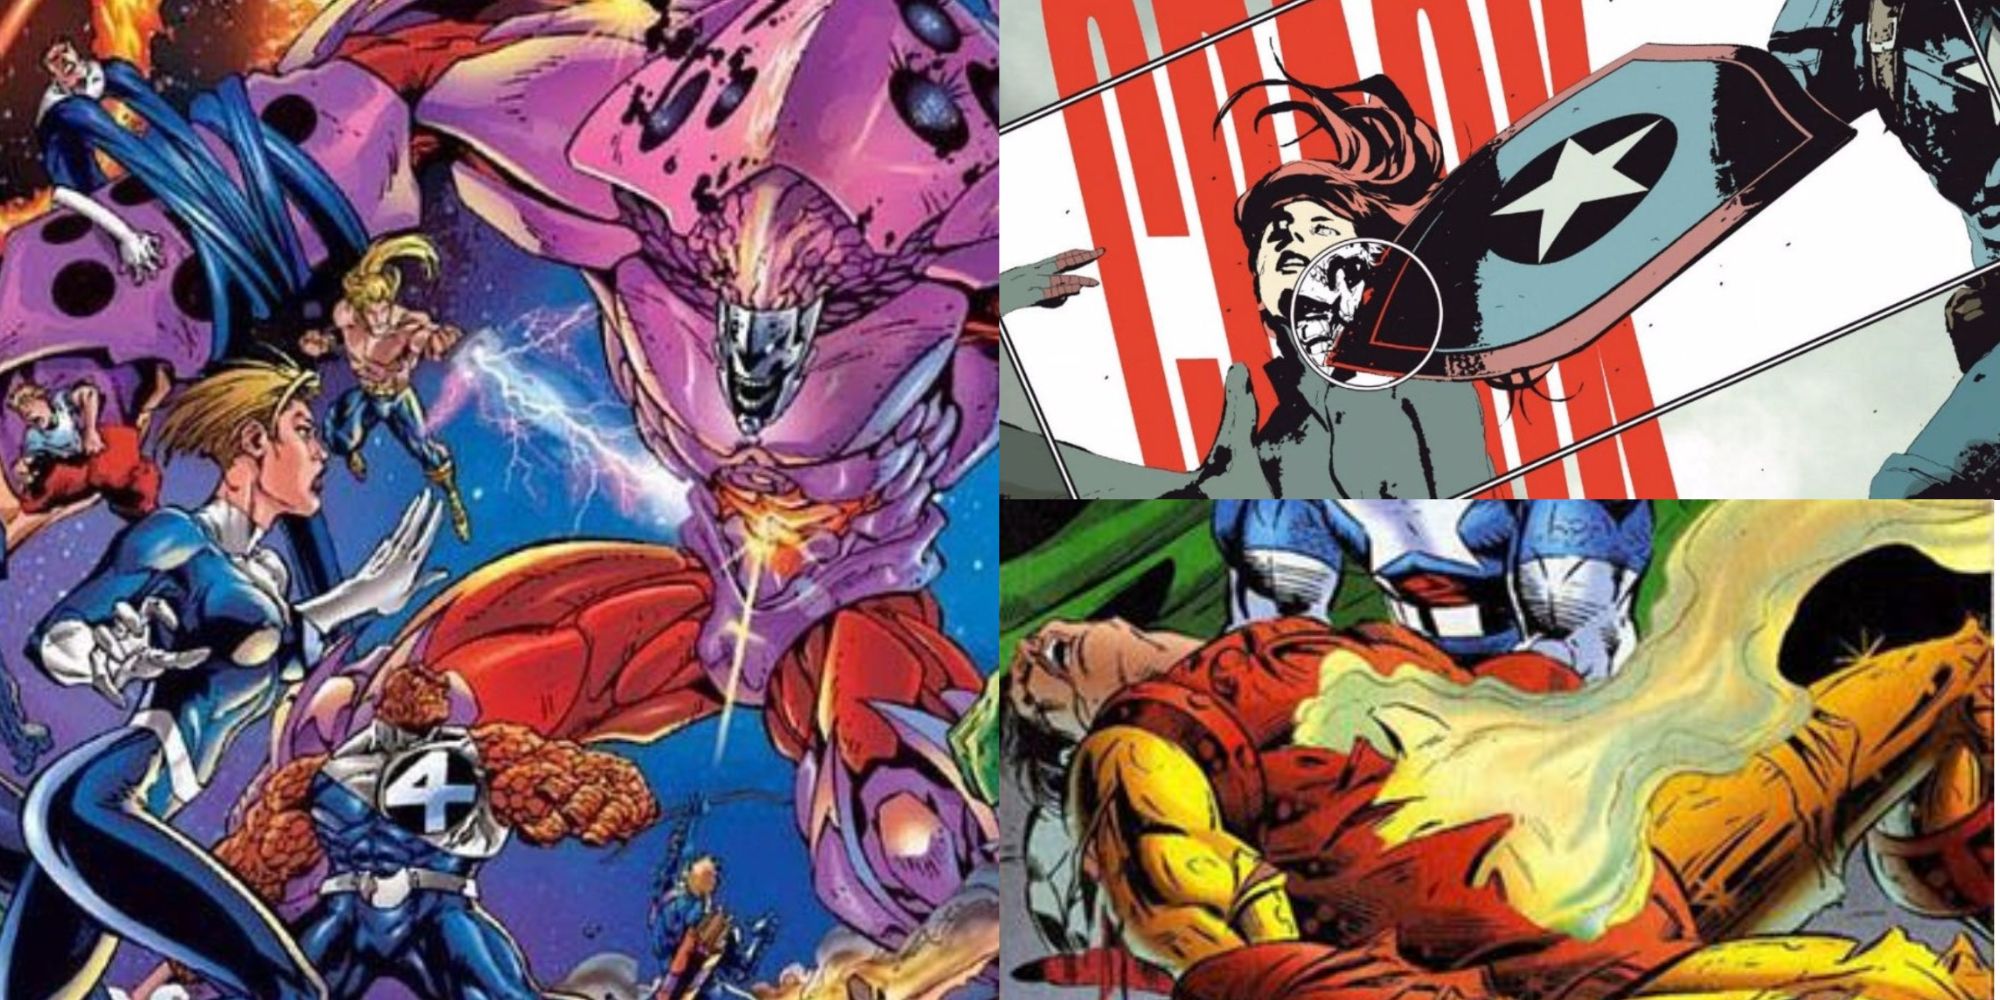 Clockwise from left: The Avengers and Fantastic Four fighting Onslaught, Black Widow dying in Secret Empire, and Iron Man's corpse in 